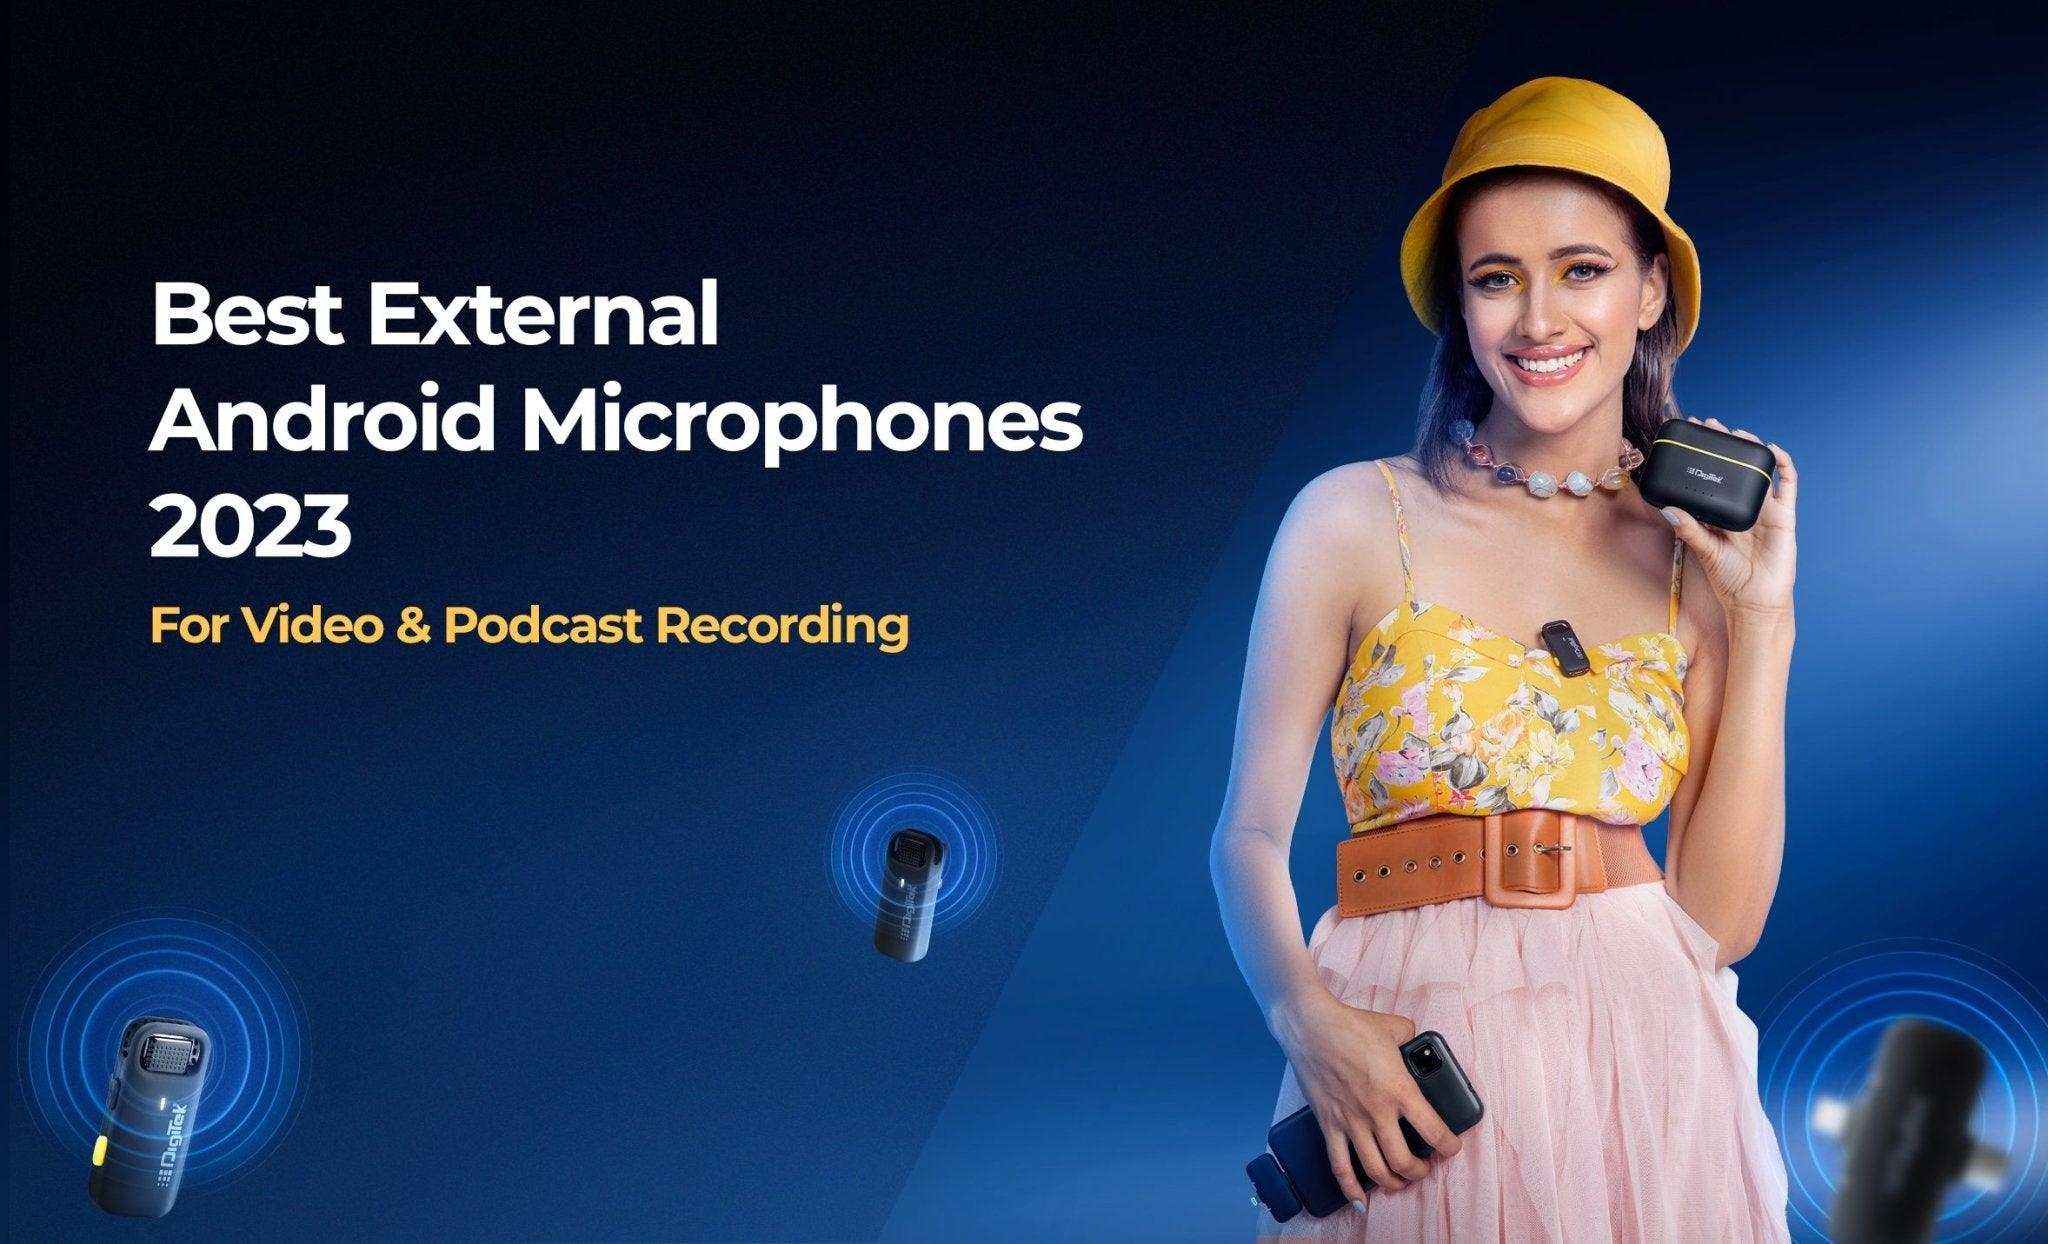 Best External Android Microphones 2023: For Video and Podcast Recording